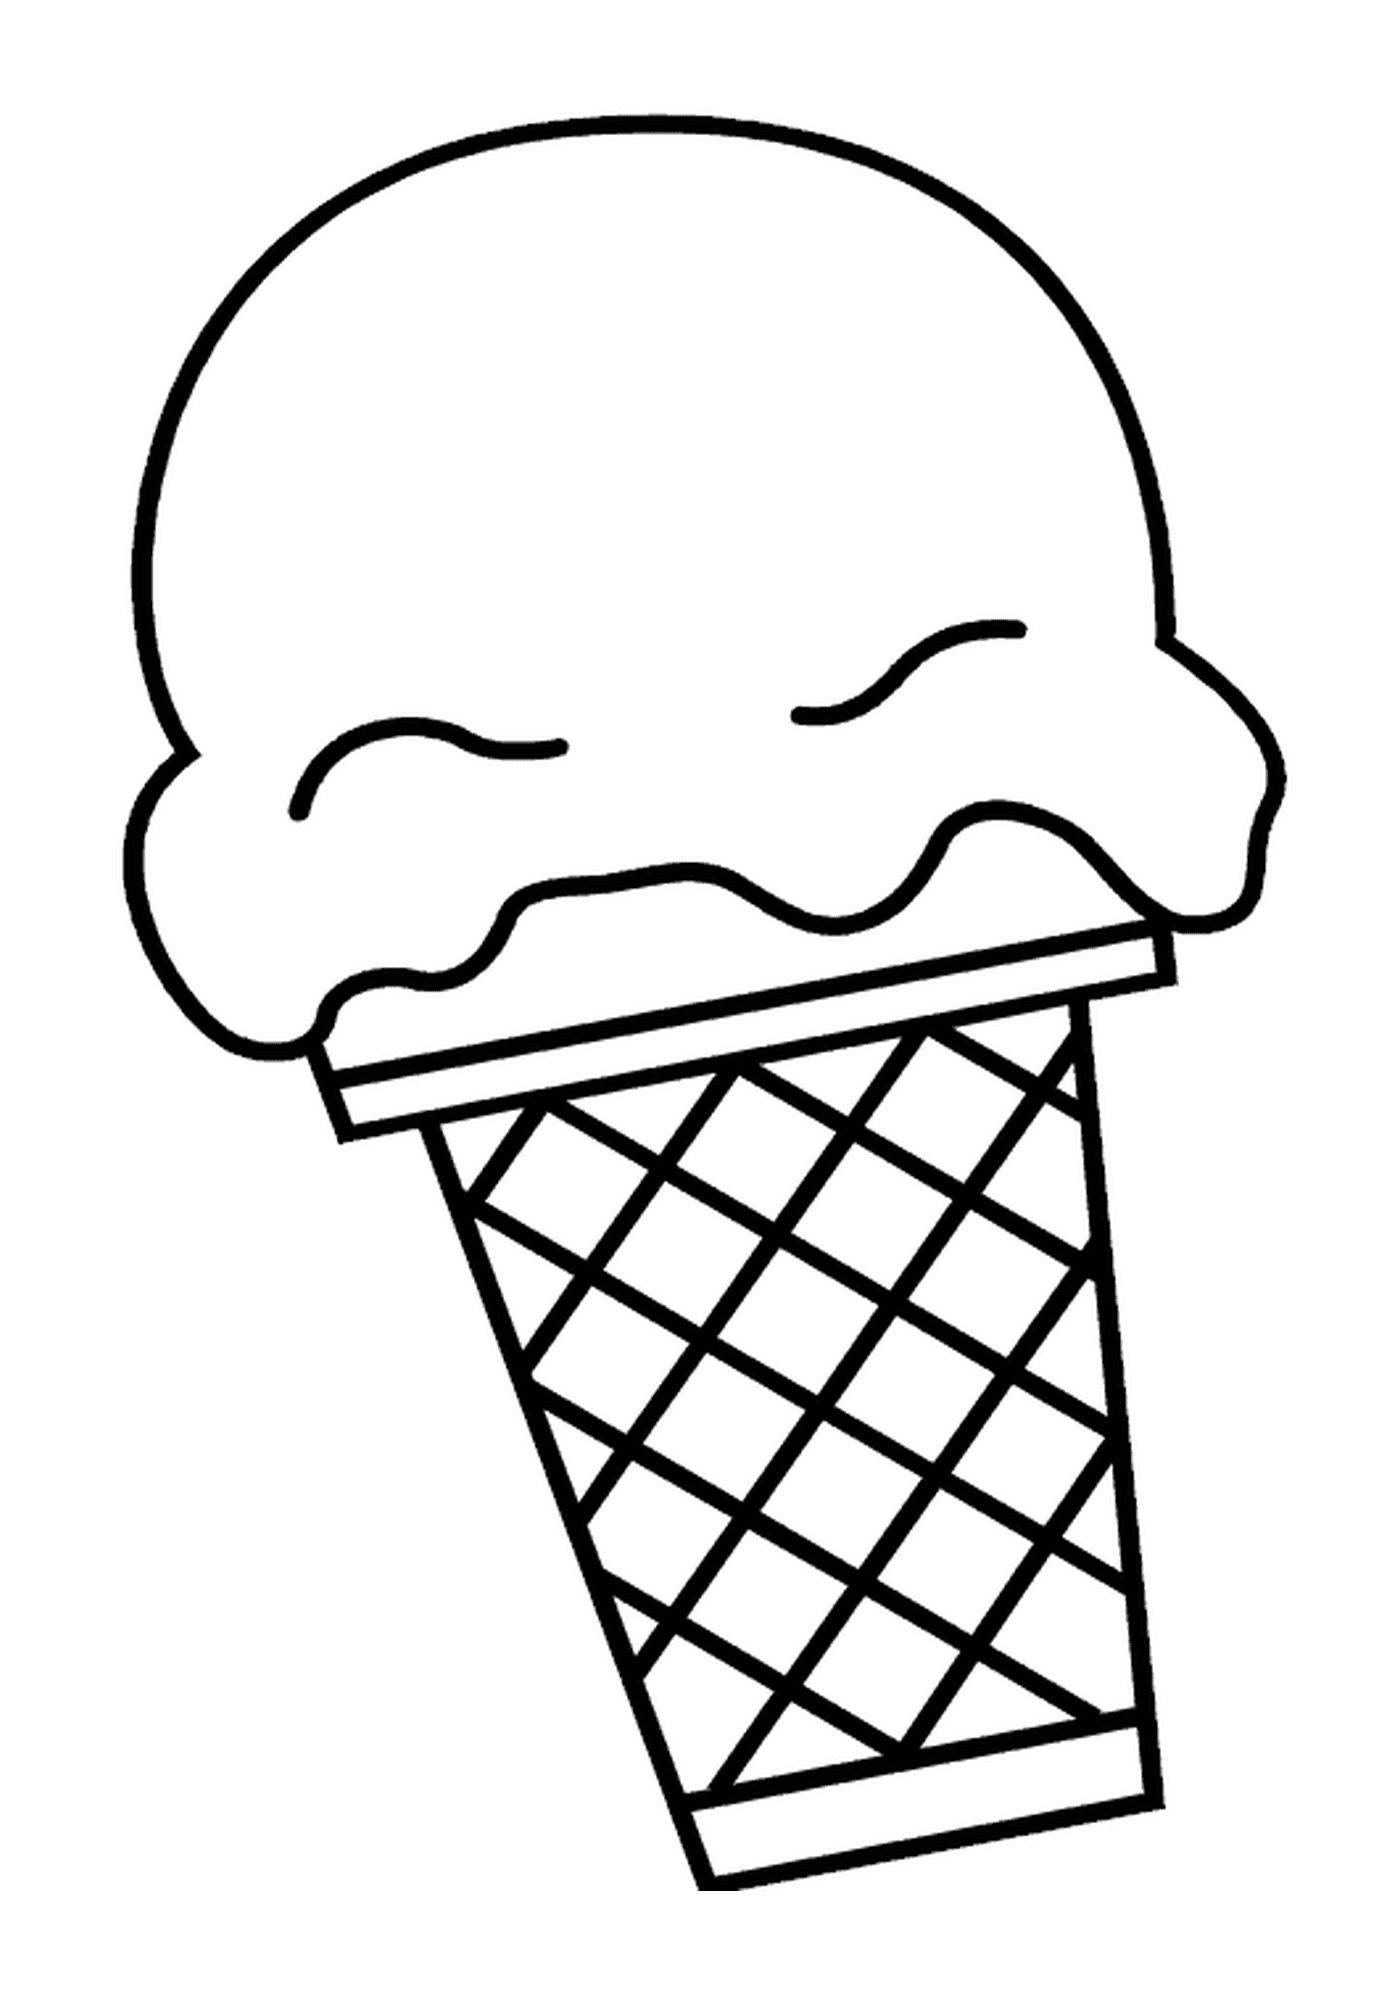  An ice cream cone with a bite 